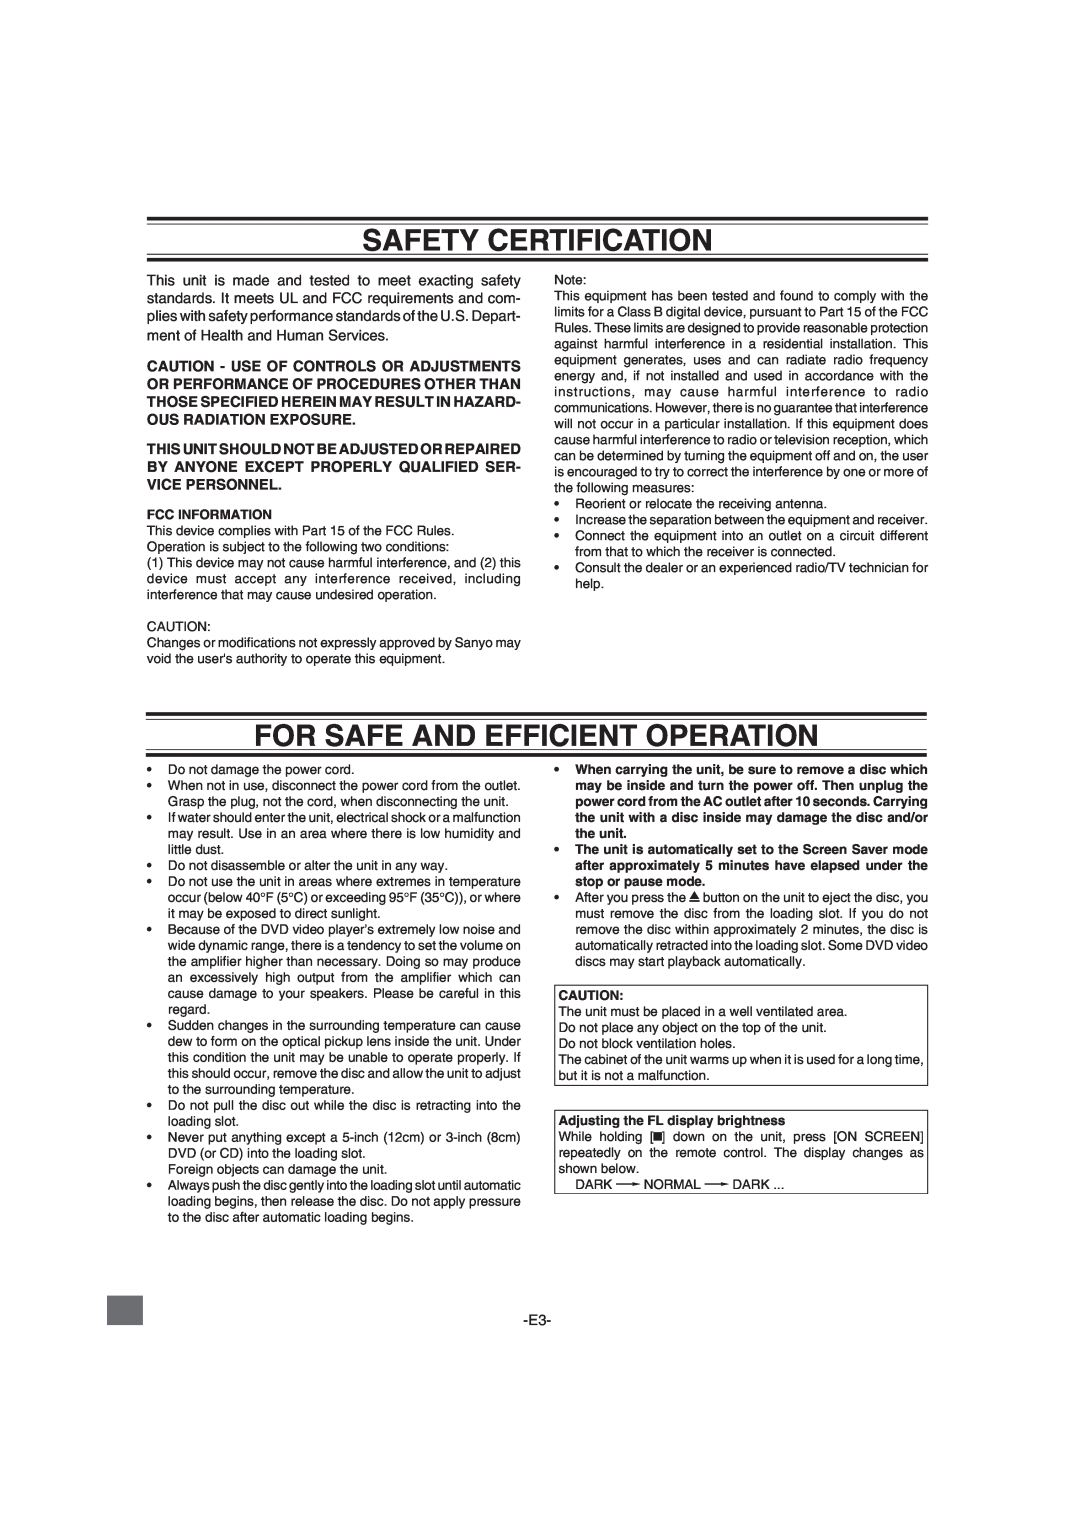 Sanyo DWM-2600 instruction manual Safety Certification, For Safe And Efficient Operation 